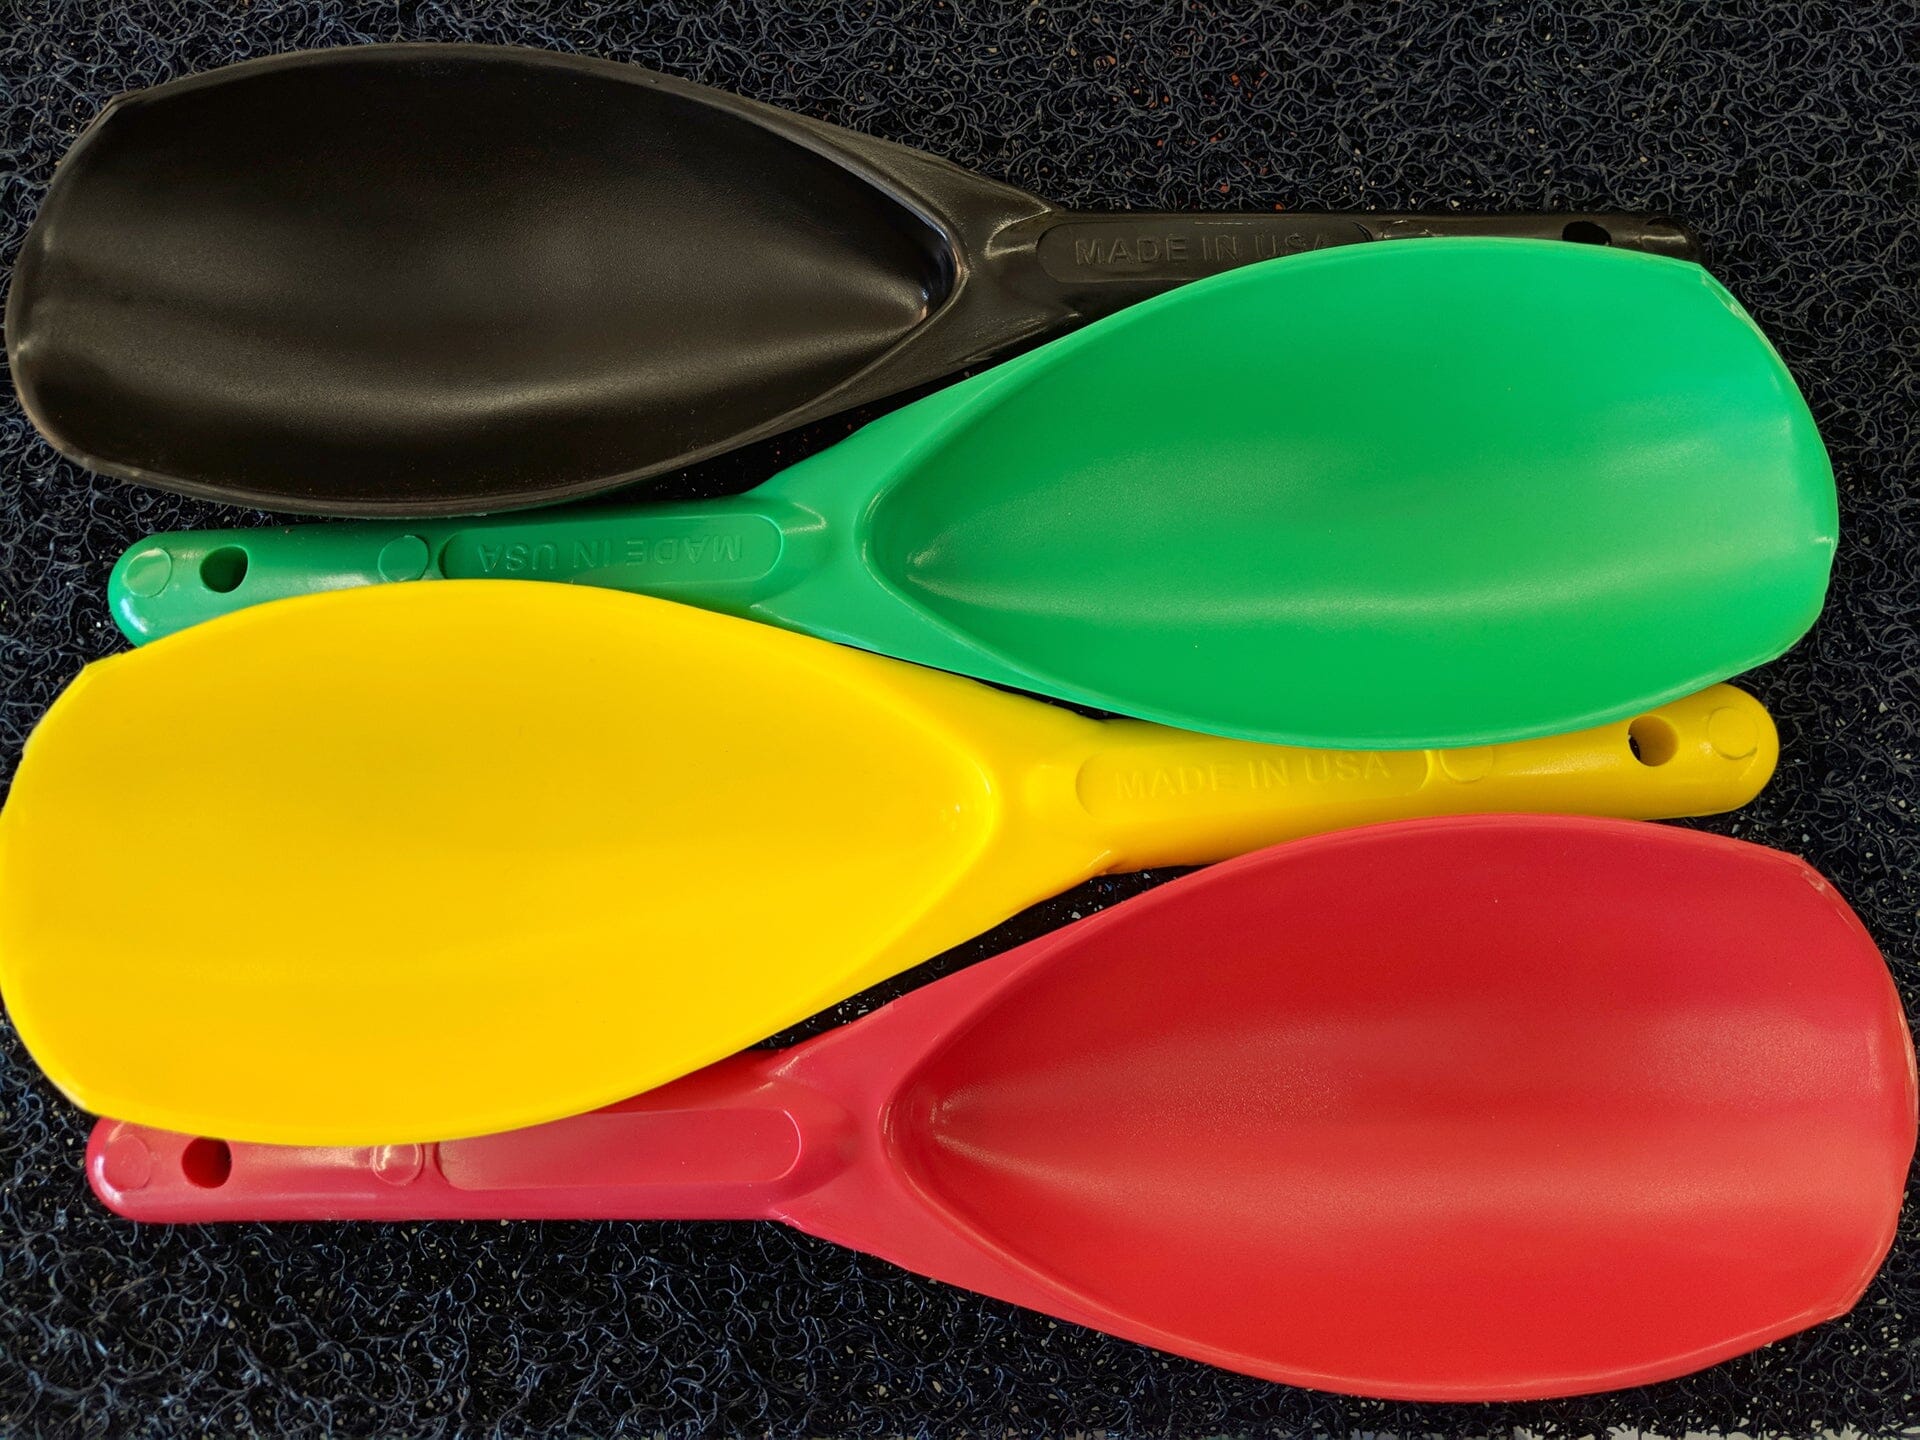 Top view of four gold nugget prospecting scoops, red, yellow, green, and black